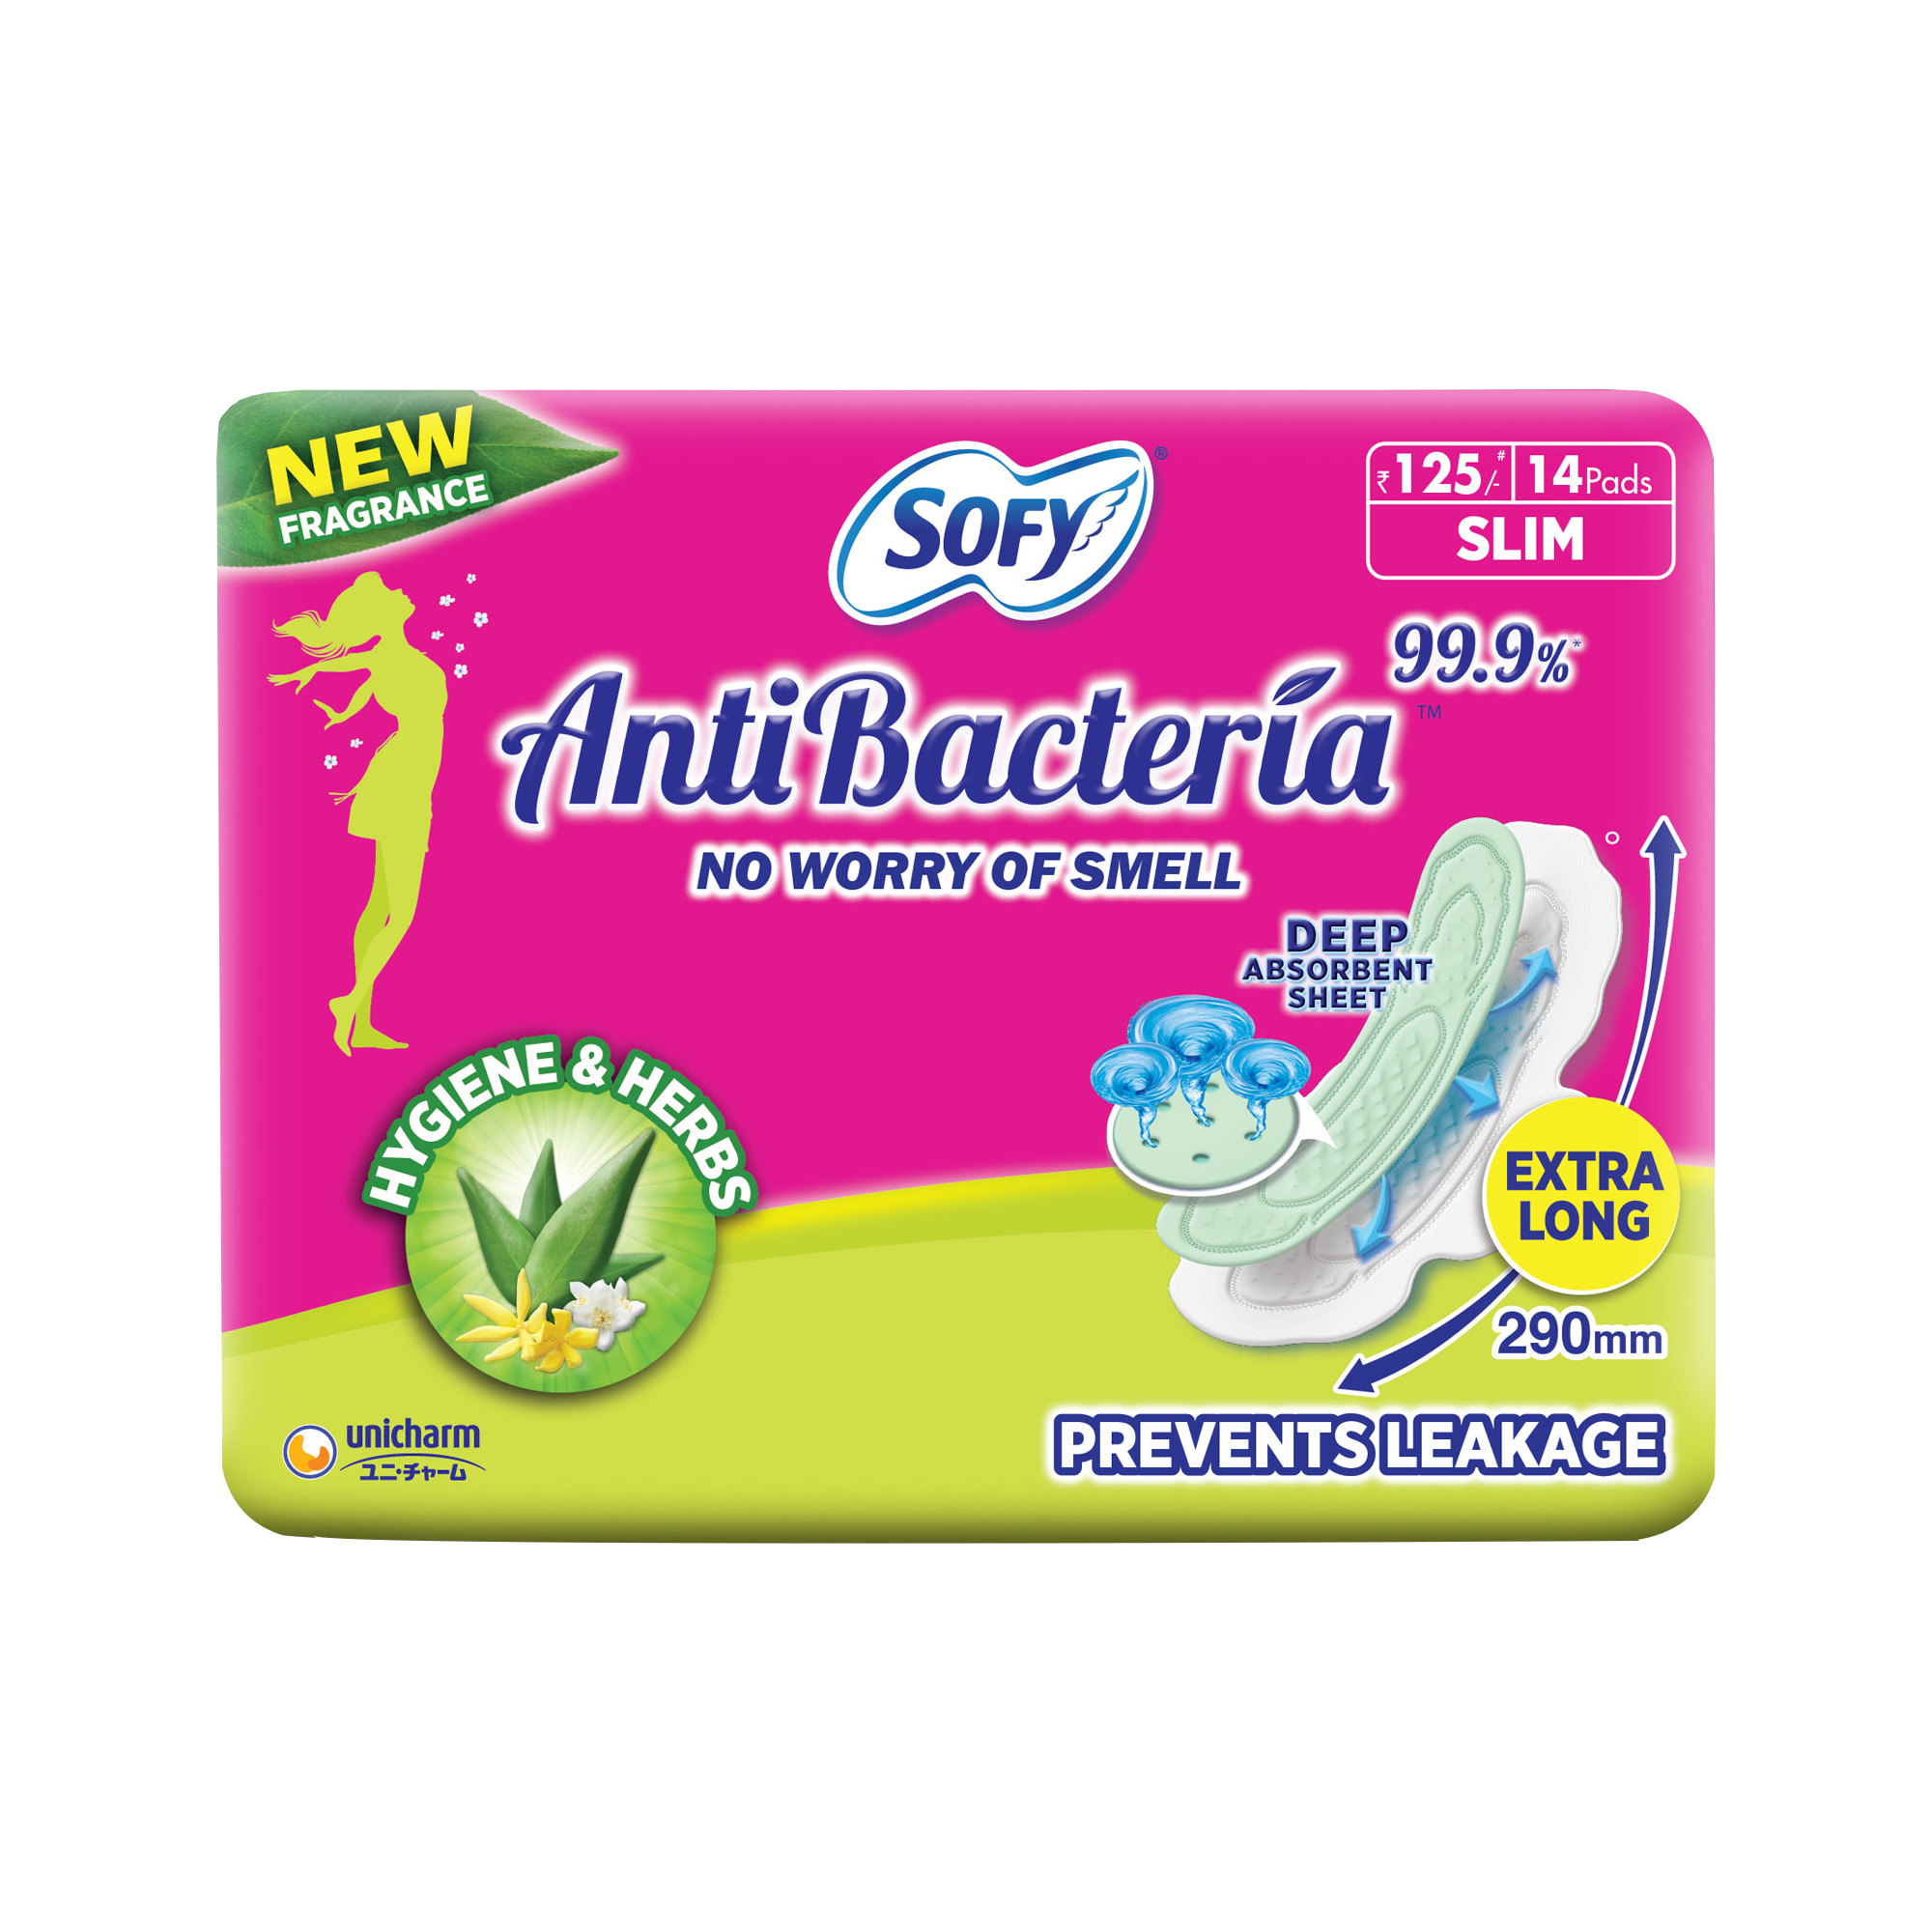 Sofy Anti Bacteria Extra Long Sanitary Pads (14 Pads at Rs125)